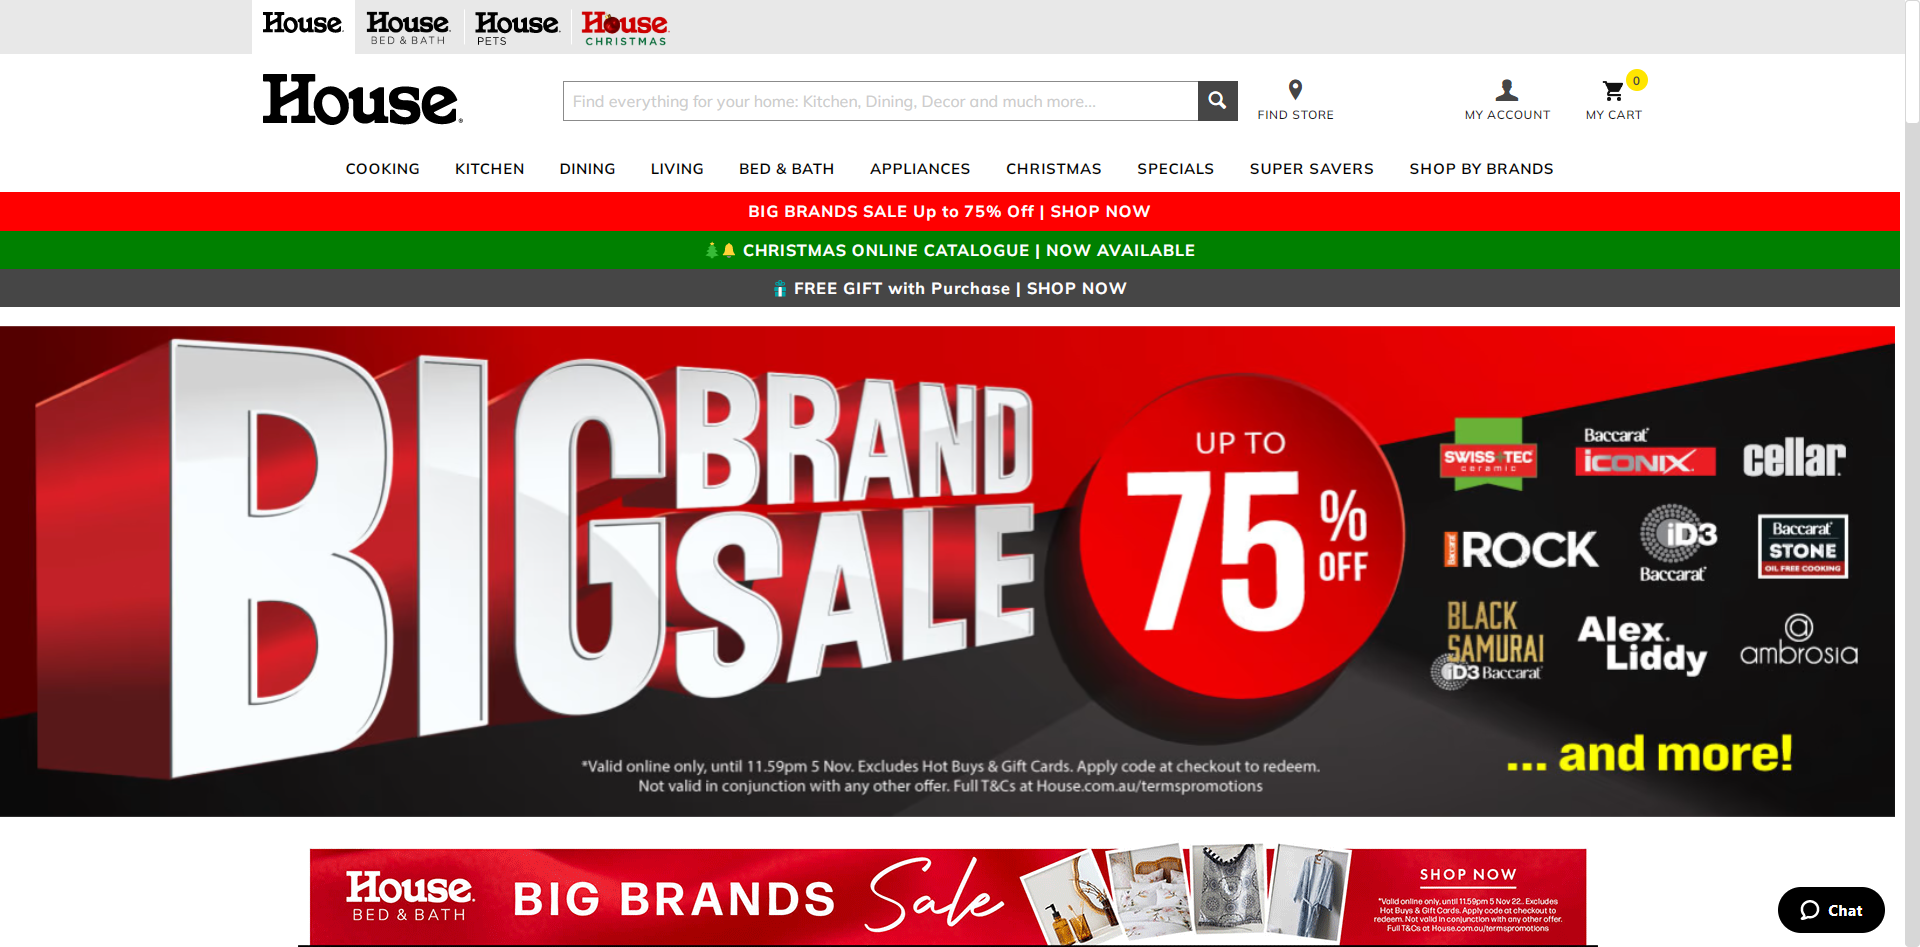 Up to 75% OFF BIG Brand Sale - Baccarat, Alex Liddy, Cellar, Grylt, Soffritto, Free shipping $99